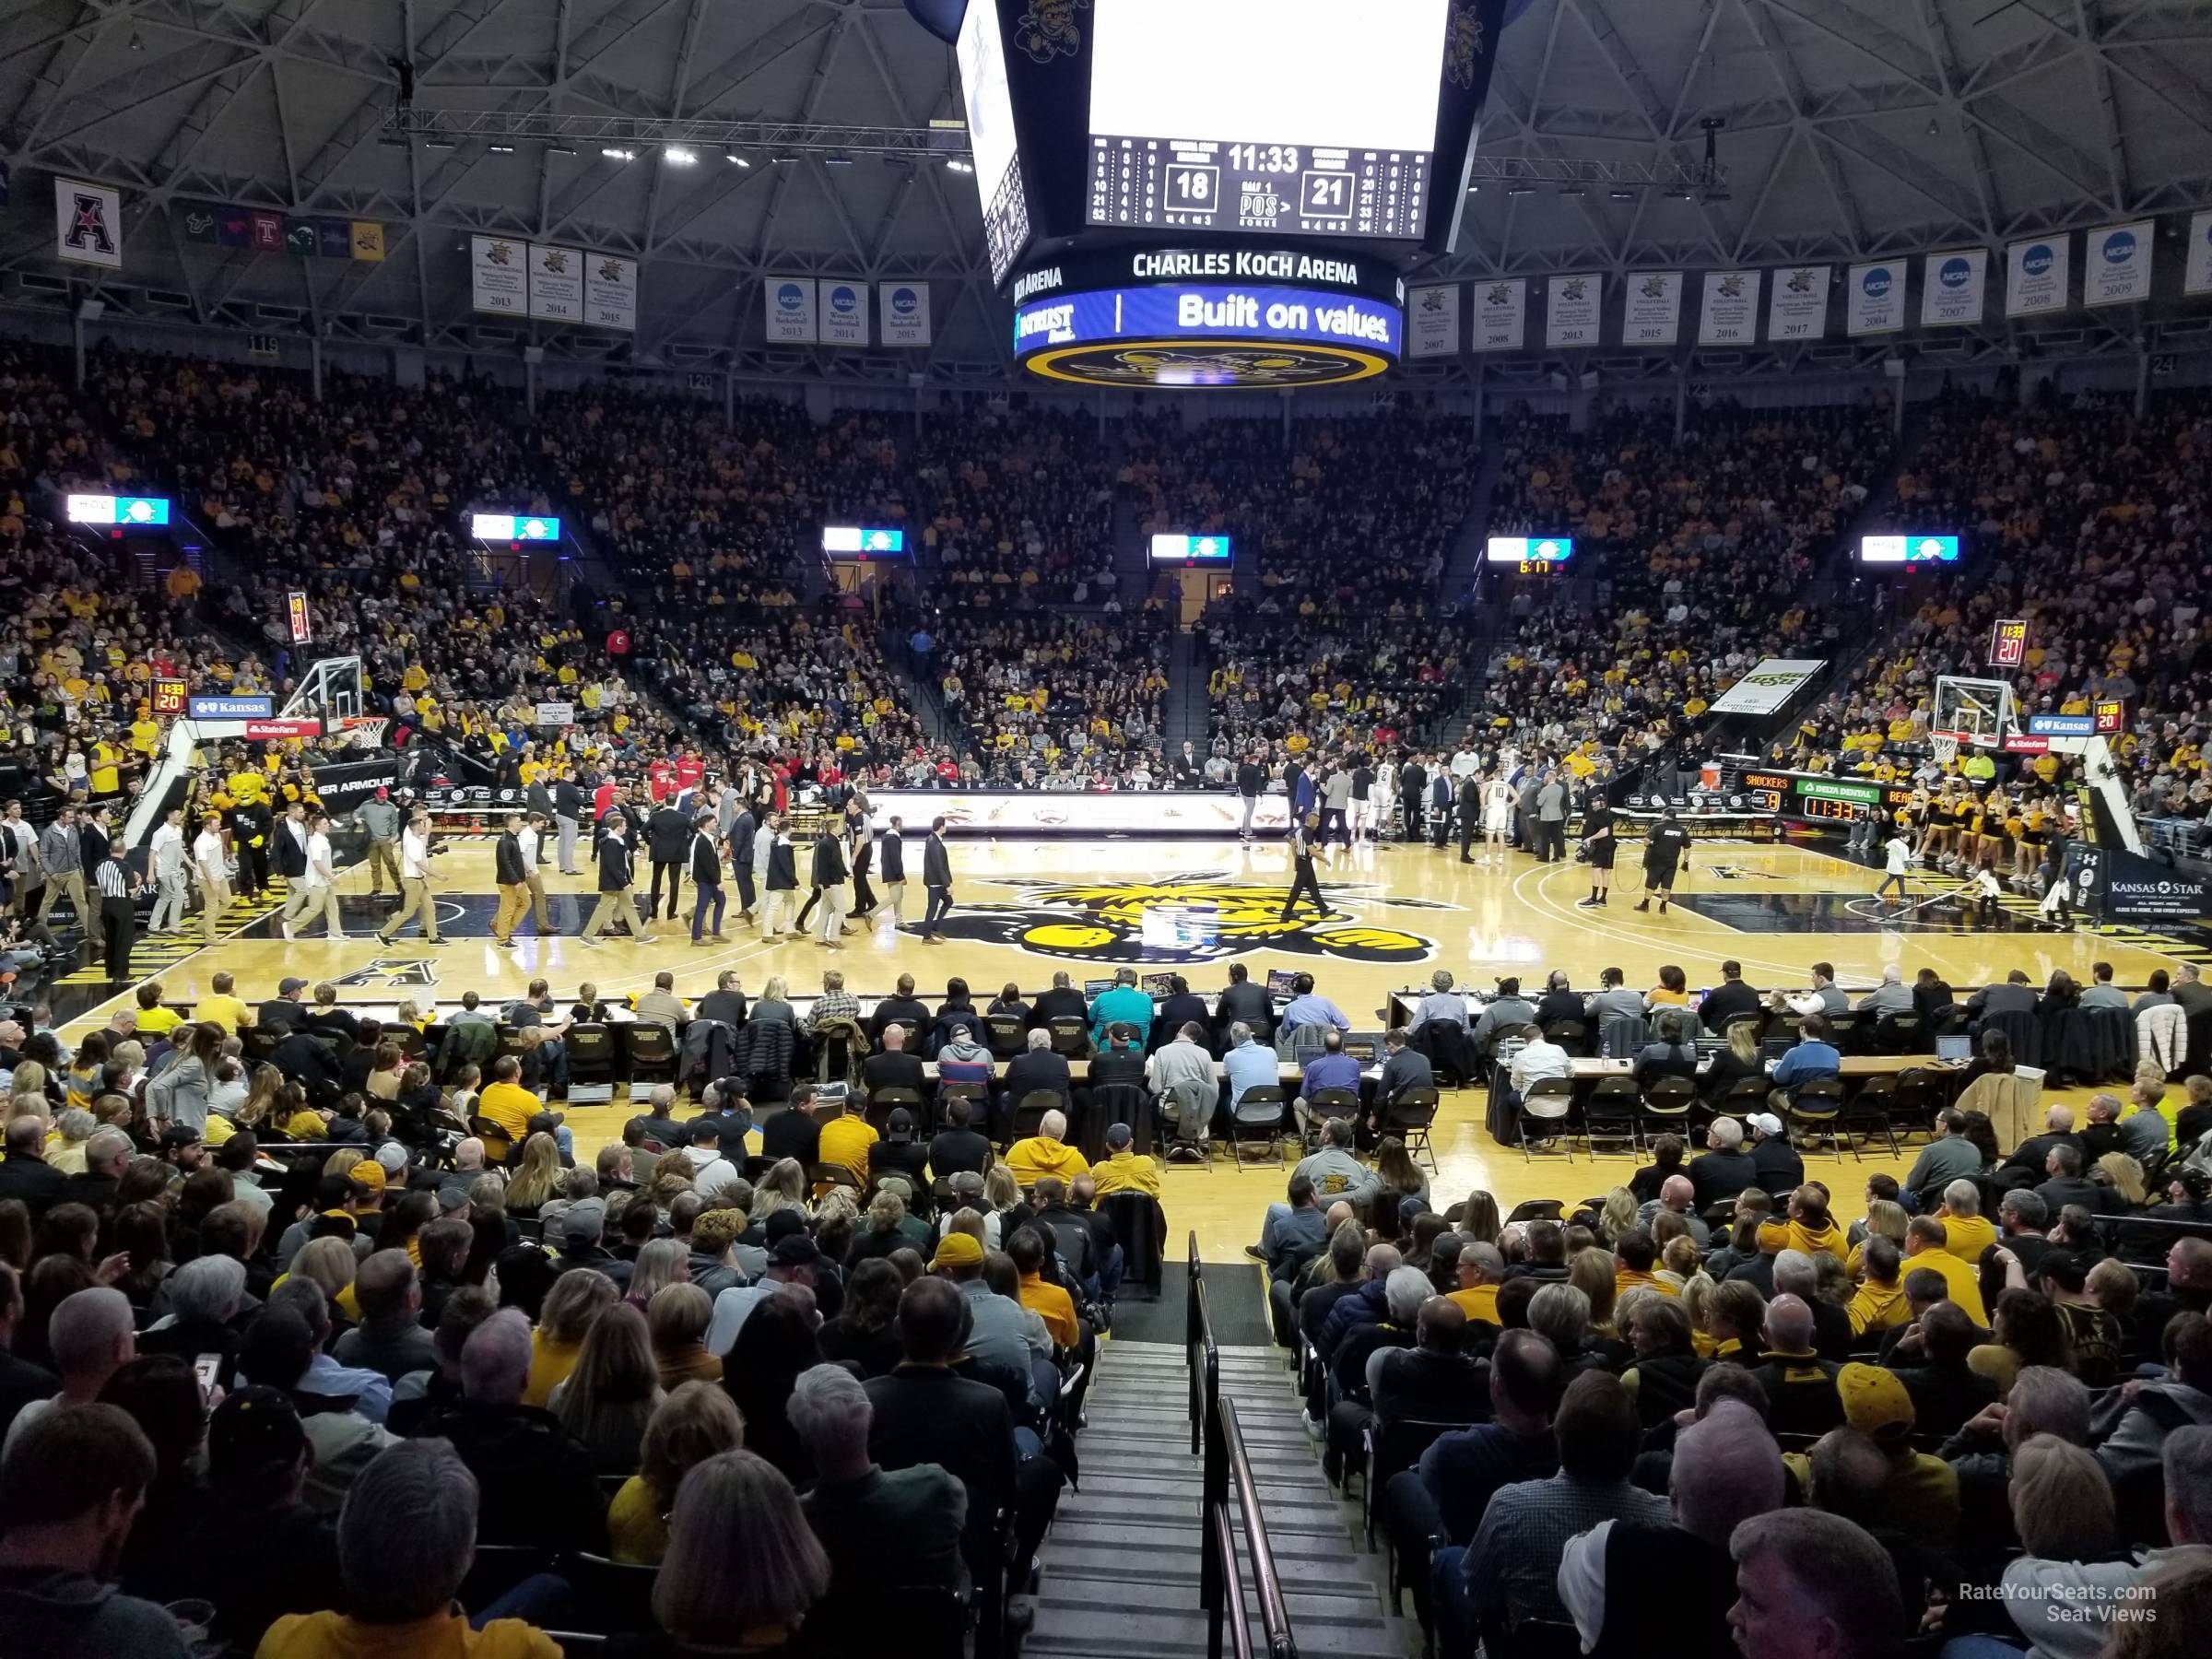 section 108, row 14 seat view  - charles koch arena